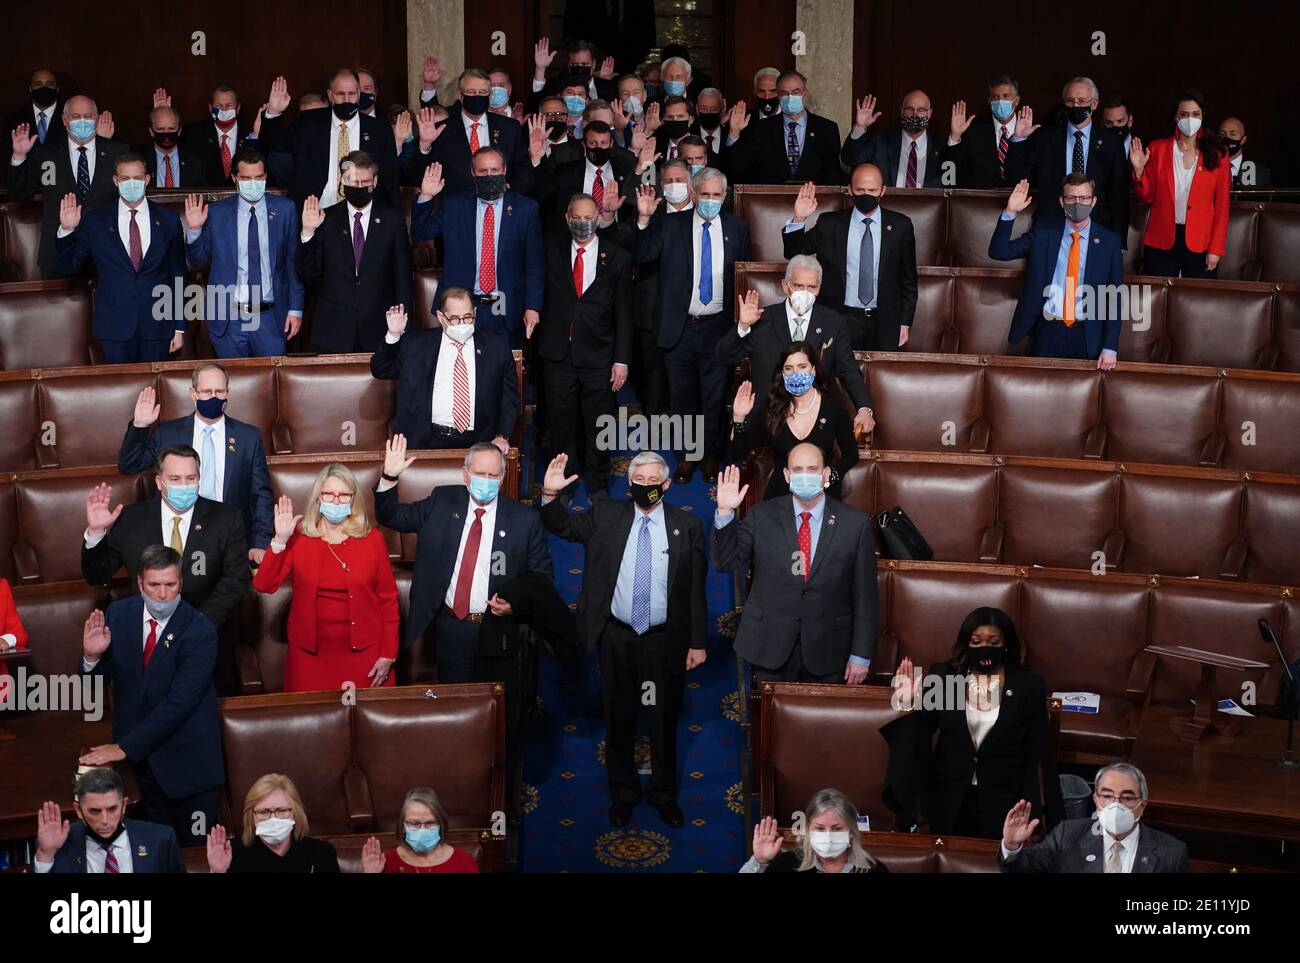 Washington, United States. 03rd Jan, 2021. Members of the House of Representatives are sworn-in during the first day of the 117th Congress in the U.S. Capitol Building on Sunday, January 3, 2021. Photo by Kevin Dietsch/UPI Credit: UPI/Alamy Live News Stock Photo